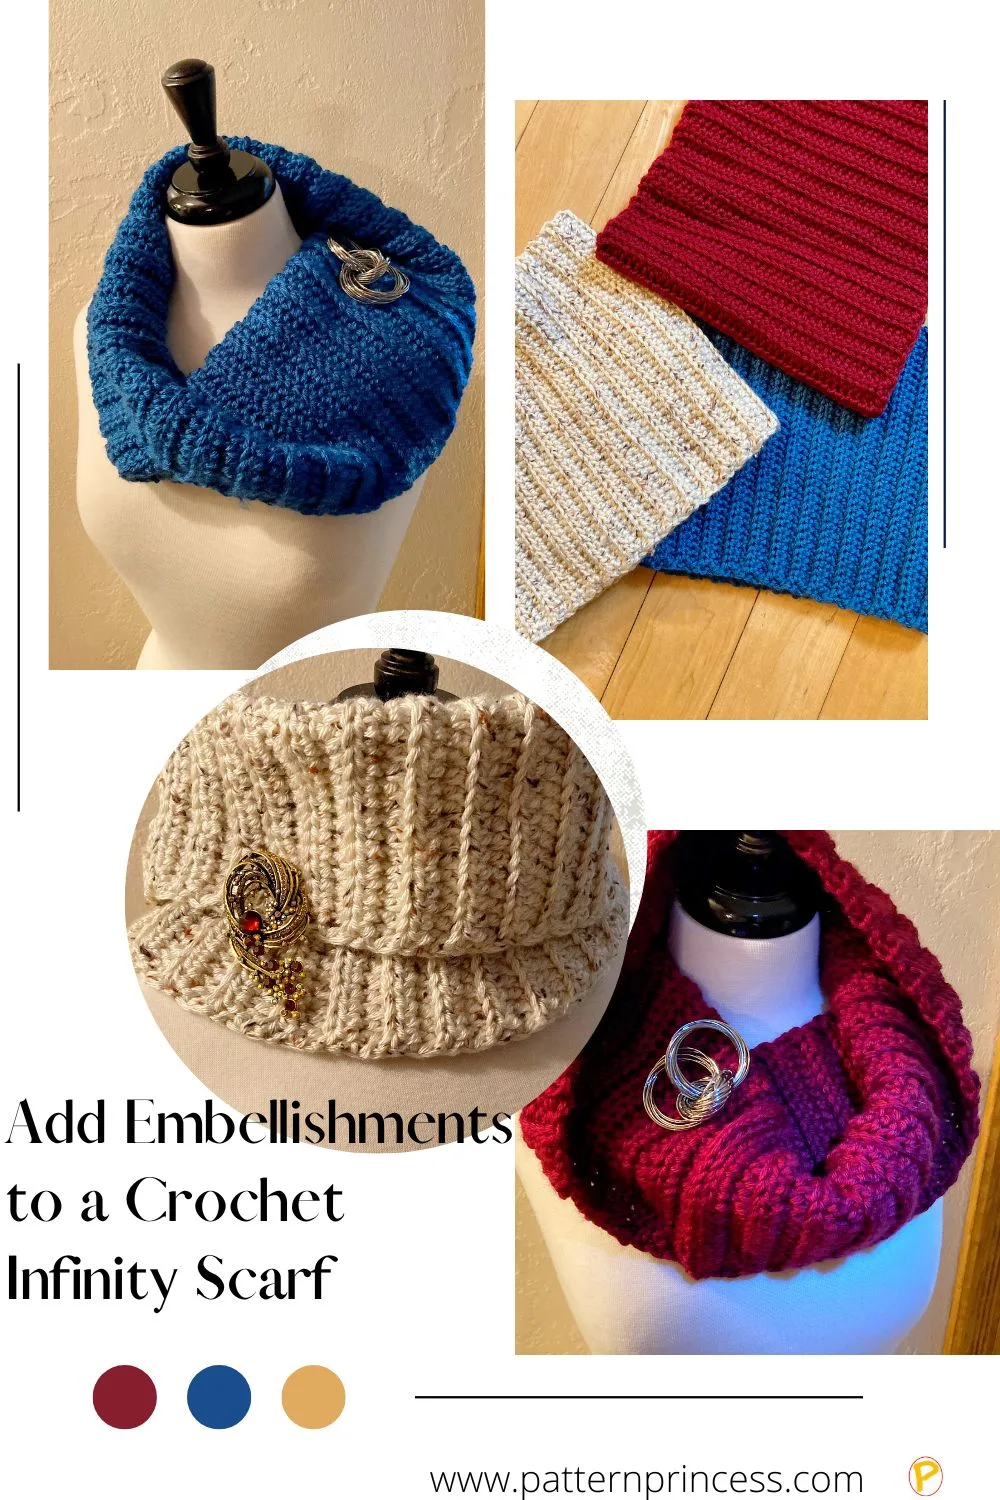 Add Embellishments to a Crochet Infinity Scarf